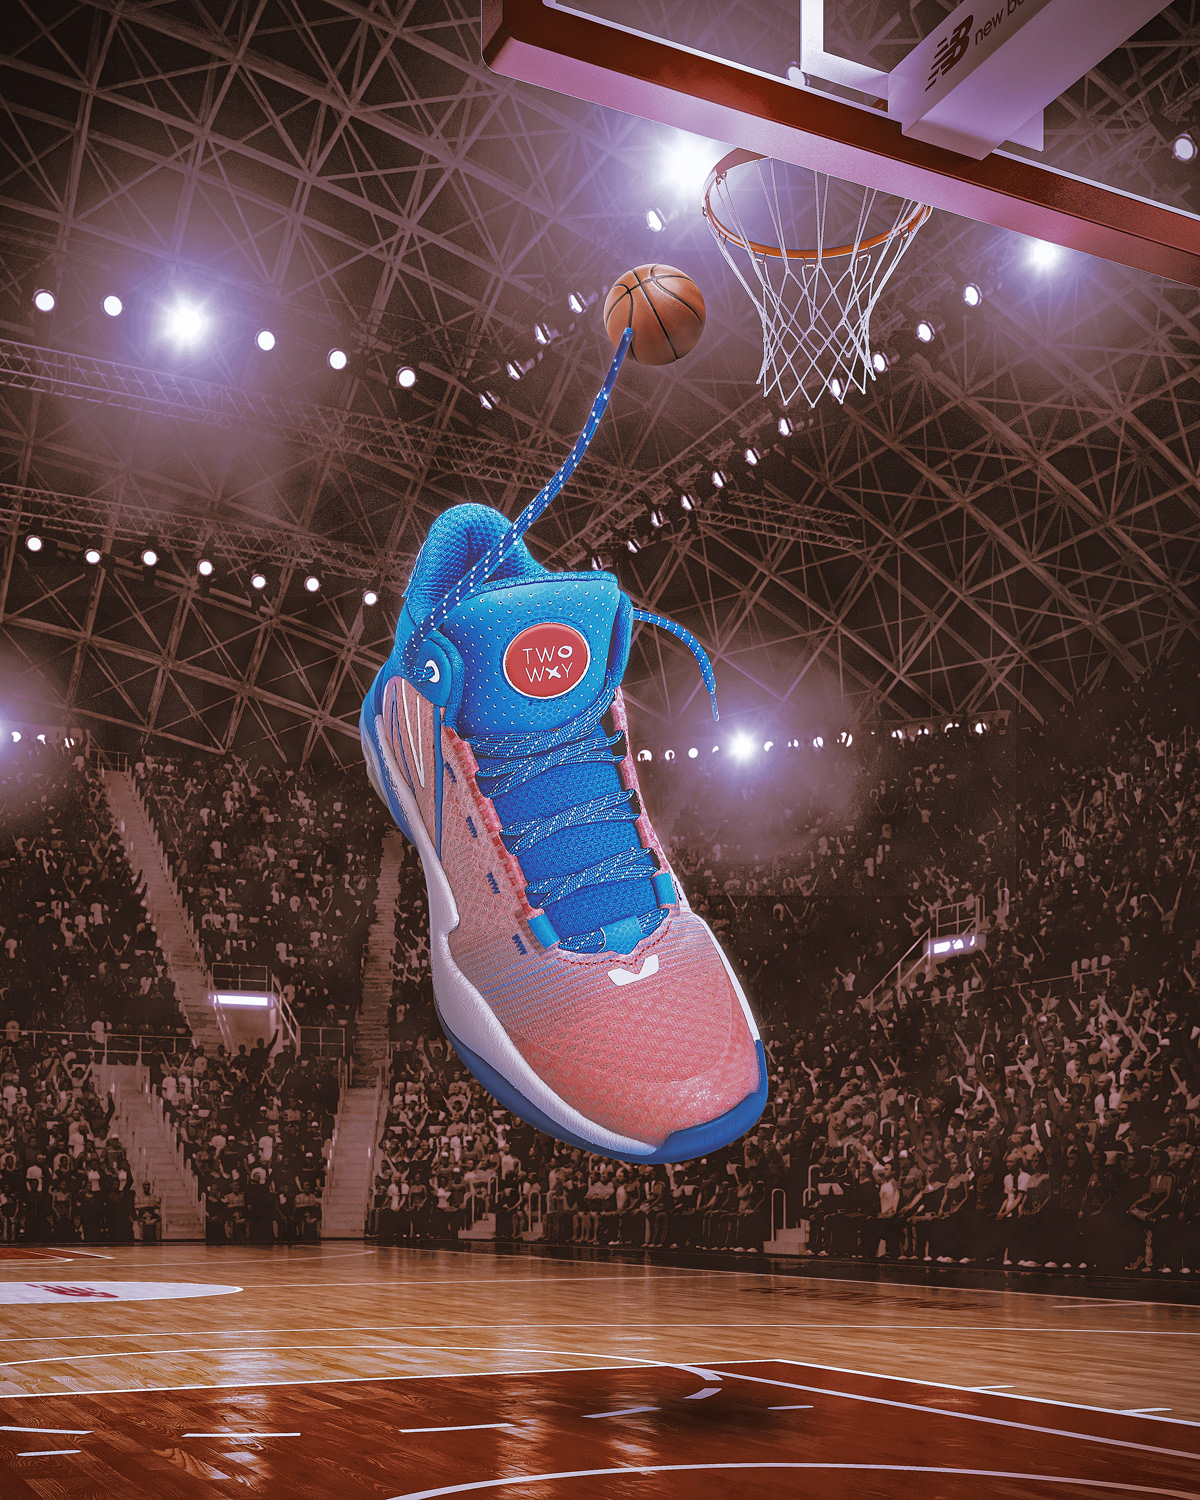 Photo composite of giant sneaker on basketball court. Retouching using Photoshop